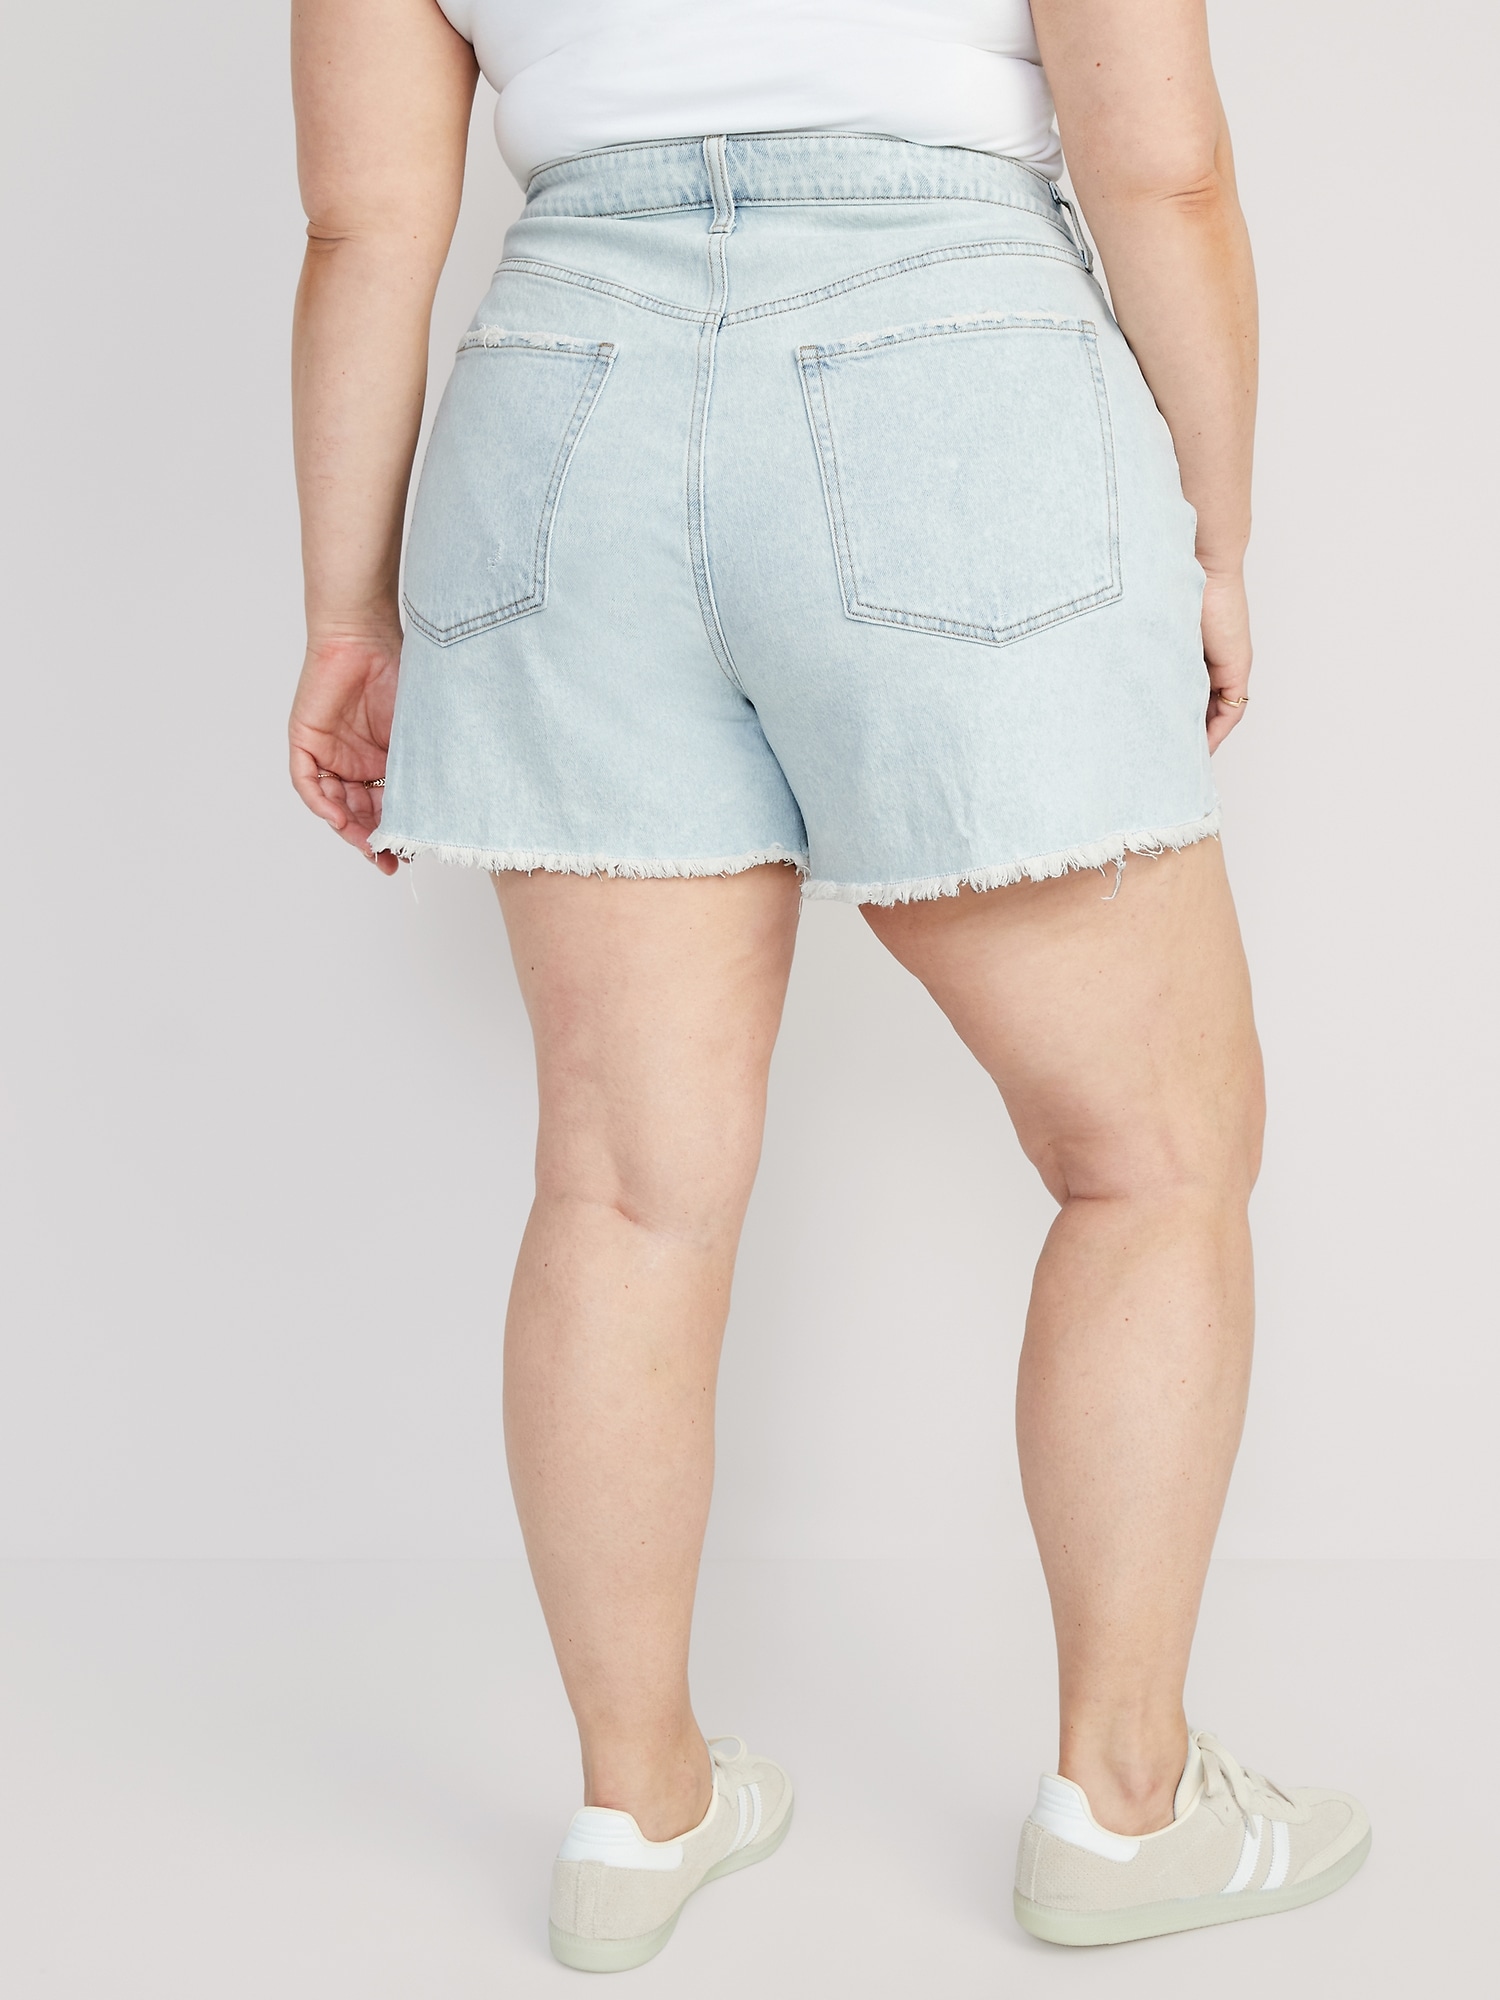 Curvy High-Waisted Button-Fly OG Straight Cut-Off Jean Shorts for